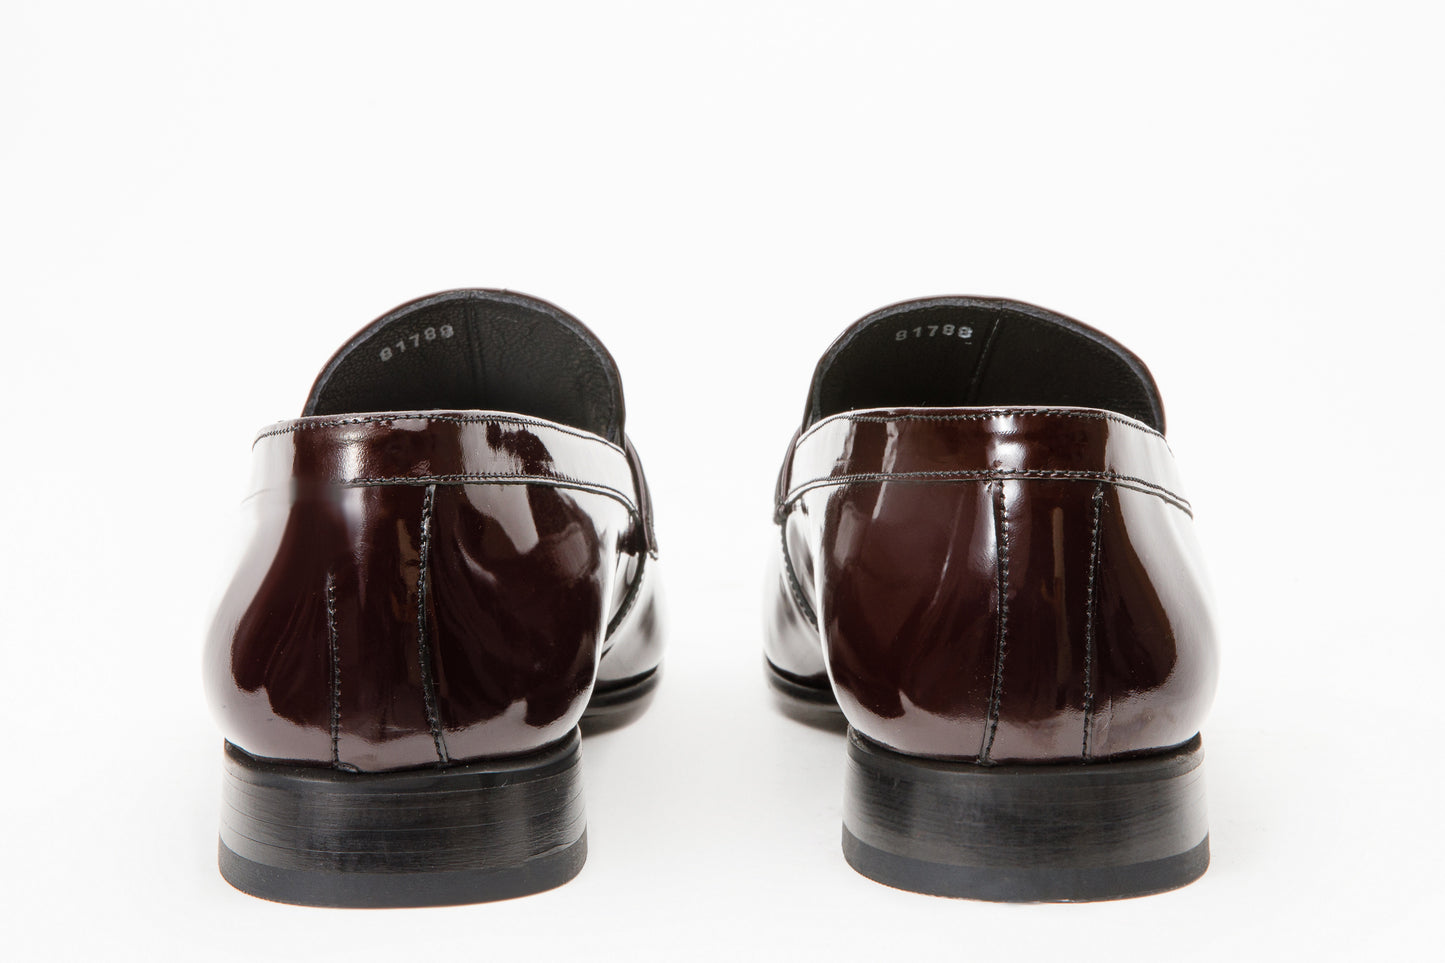 The Dodoma Burgundy Patent Leather Loafer Men Shoe